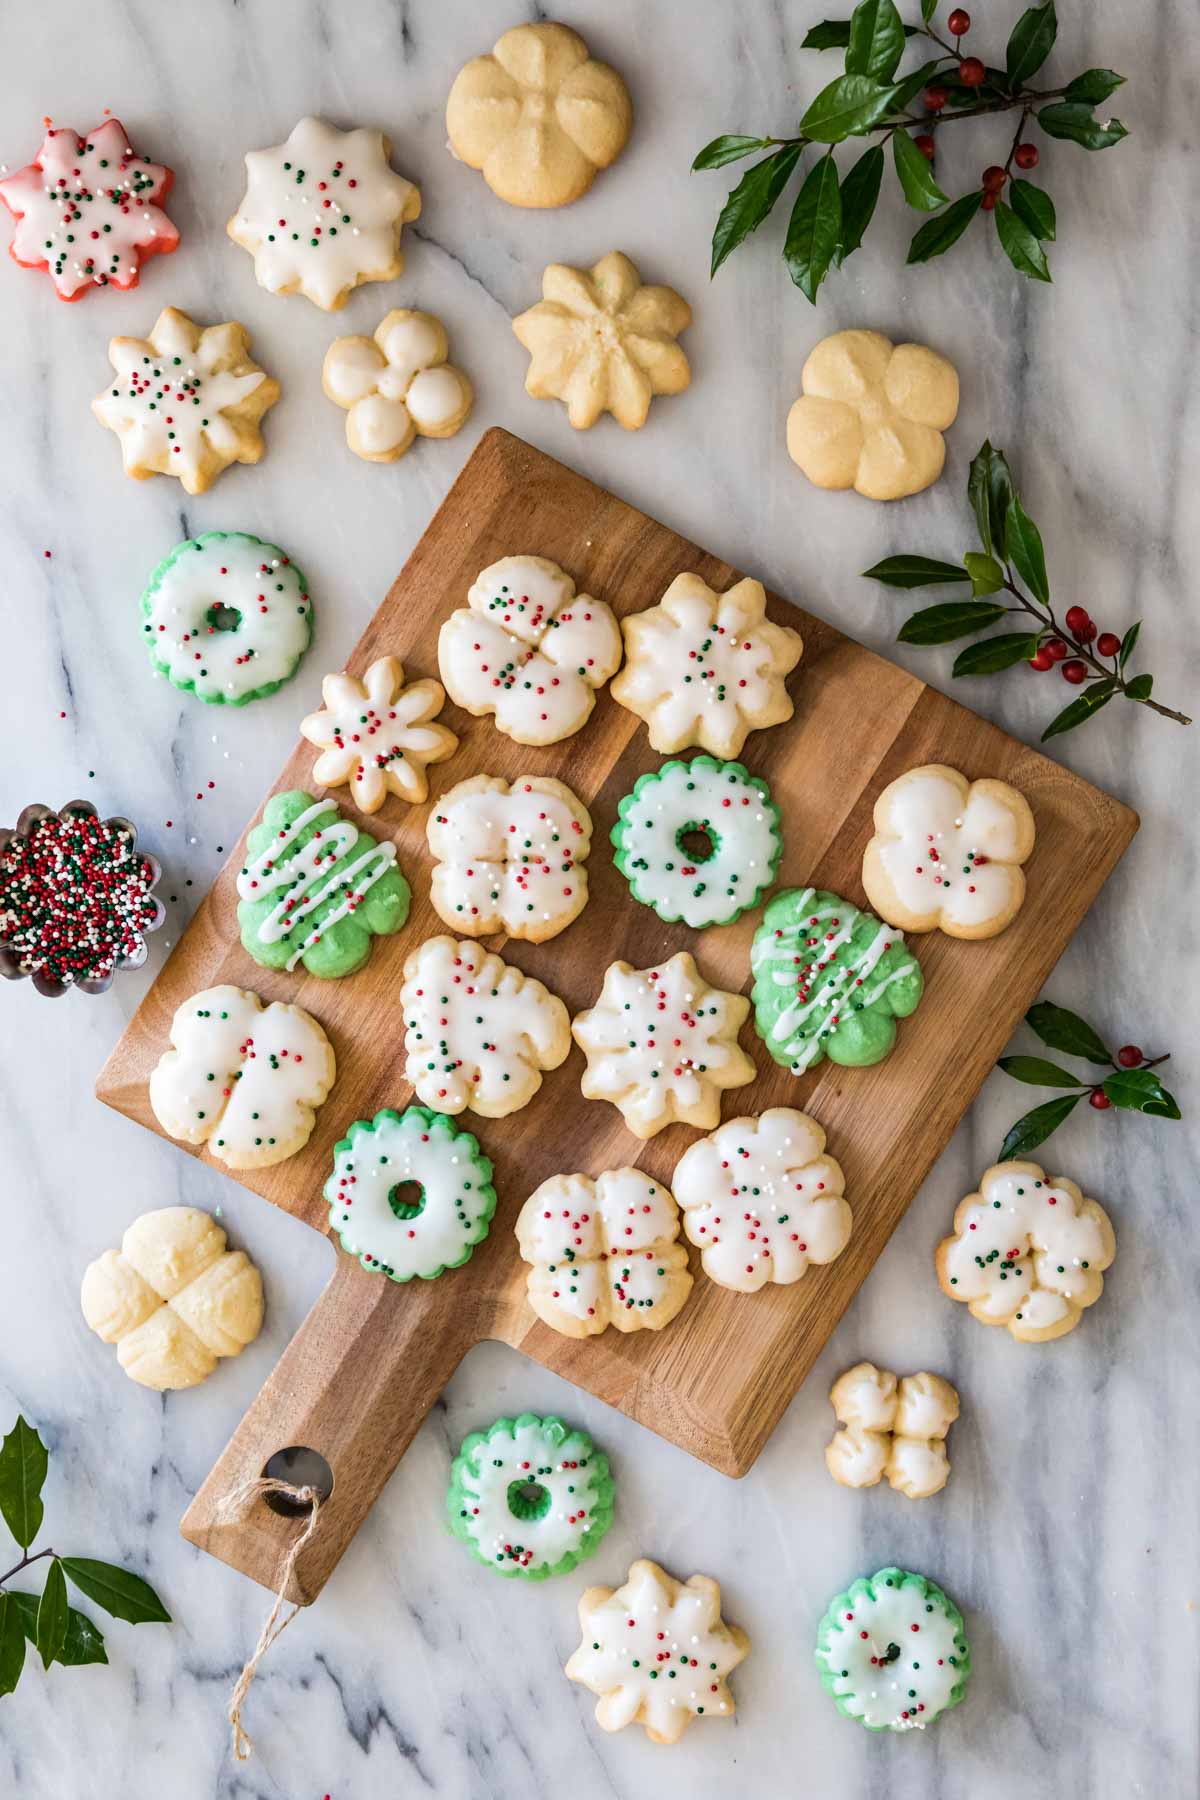 Overhead view of small shaped cookies decorated with vanilla glaze and Christmas sprinkles.